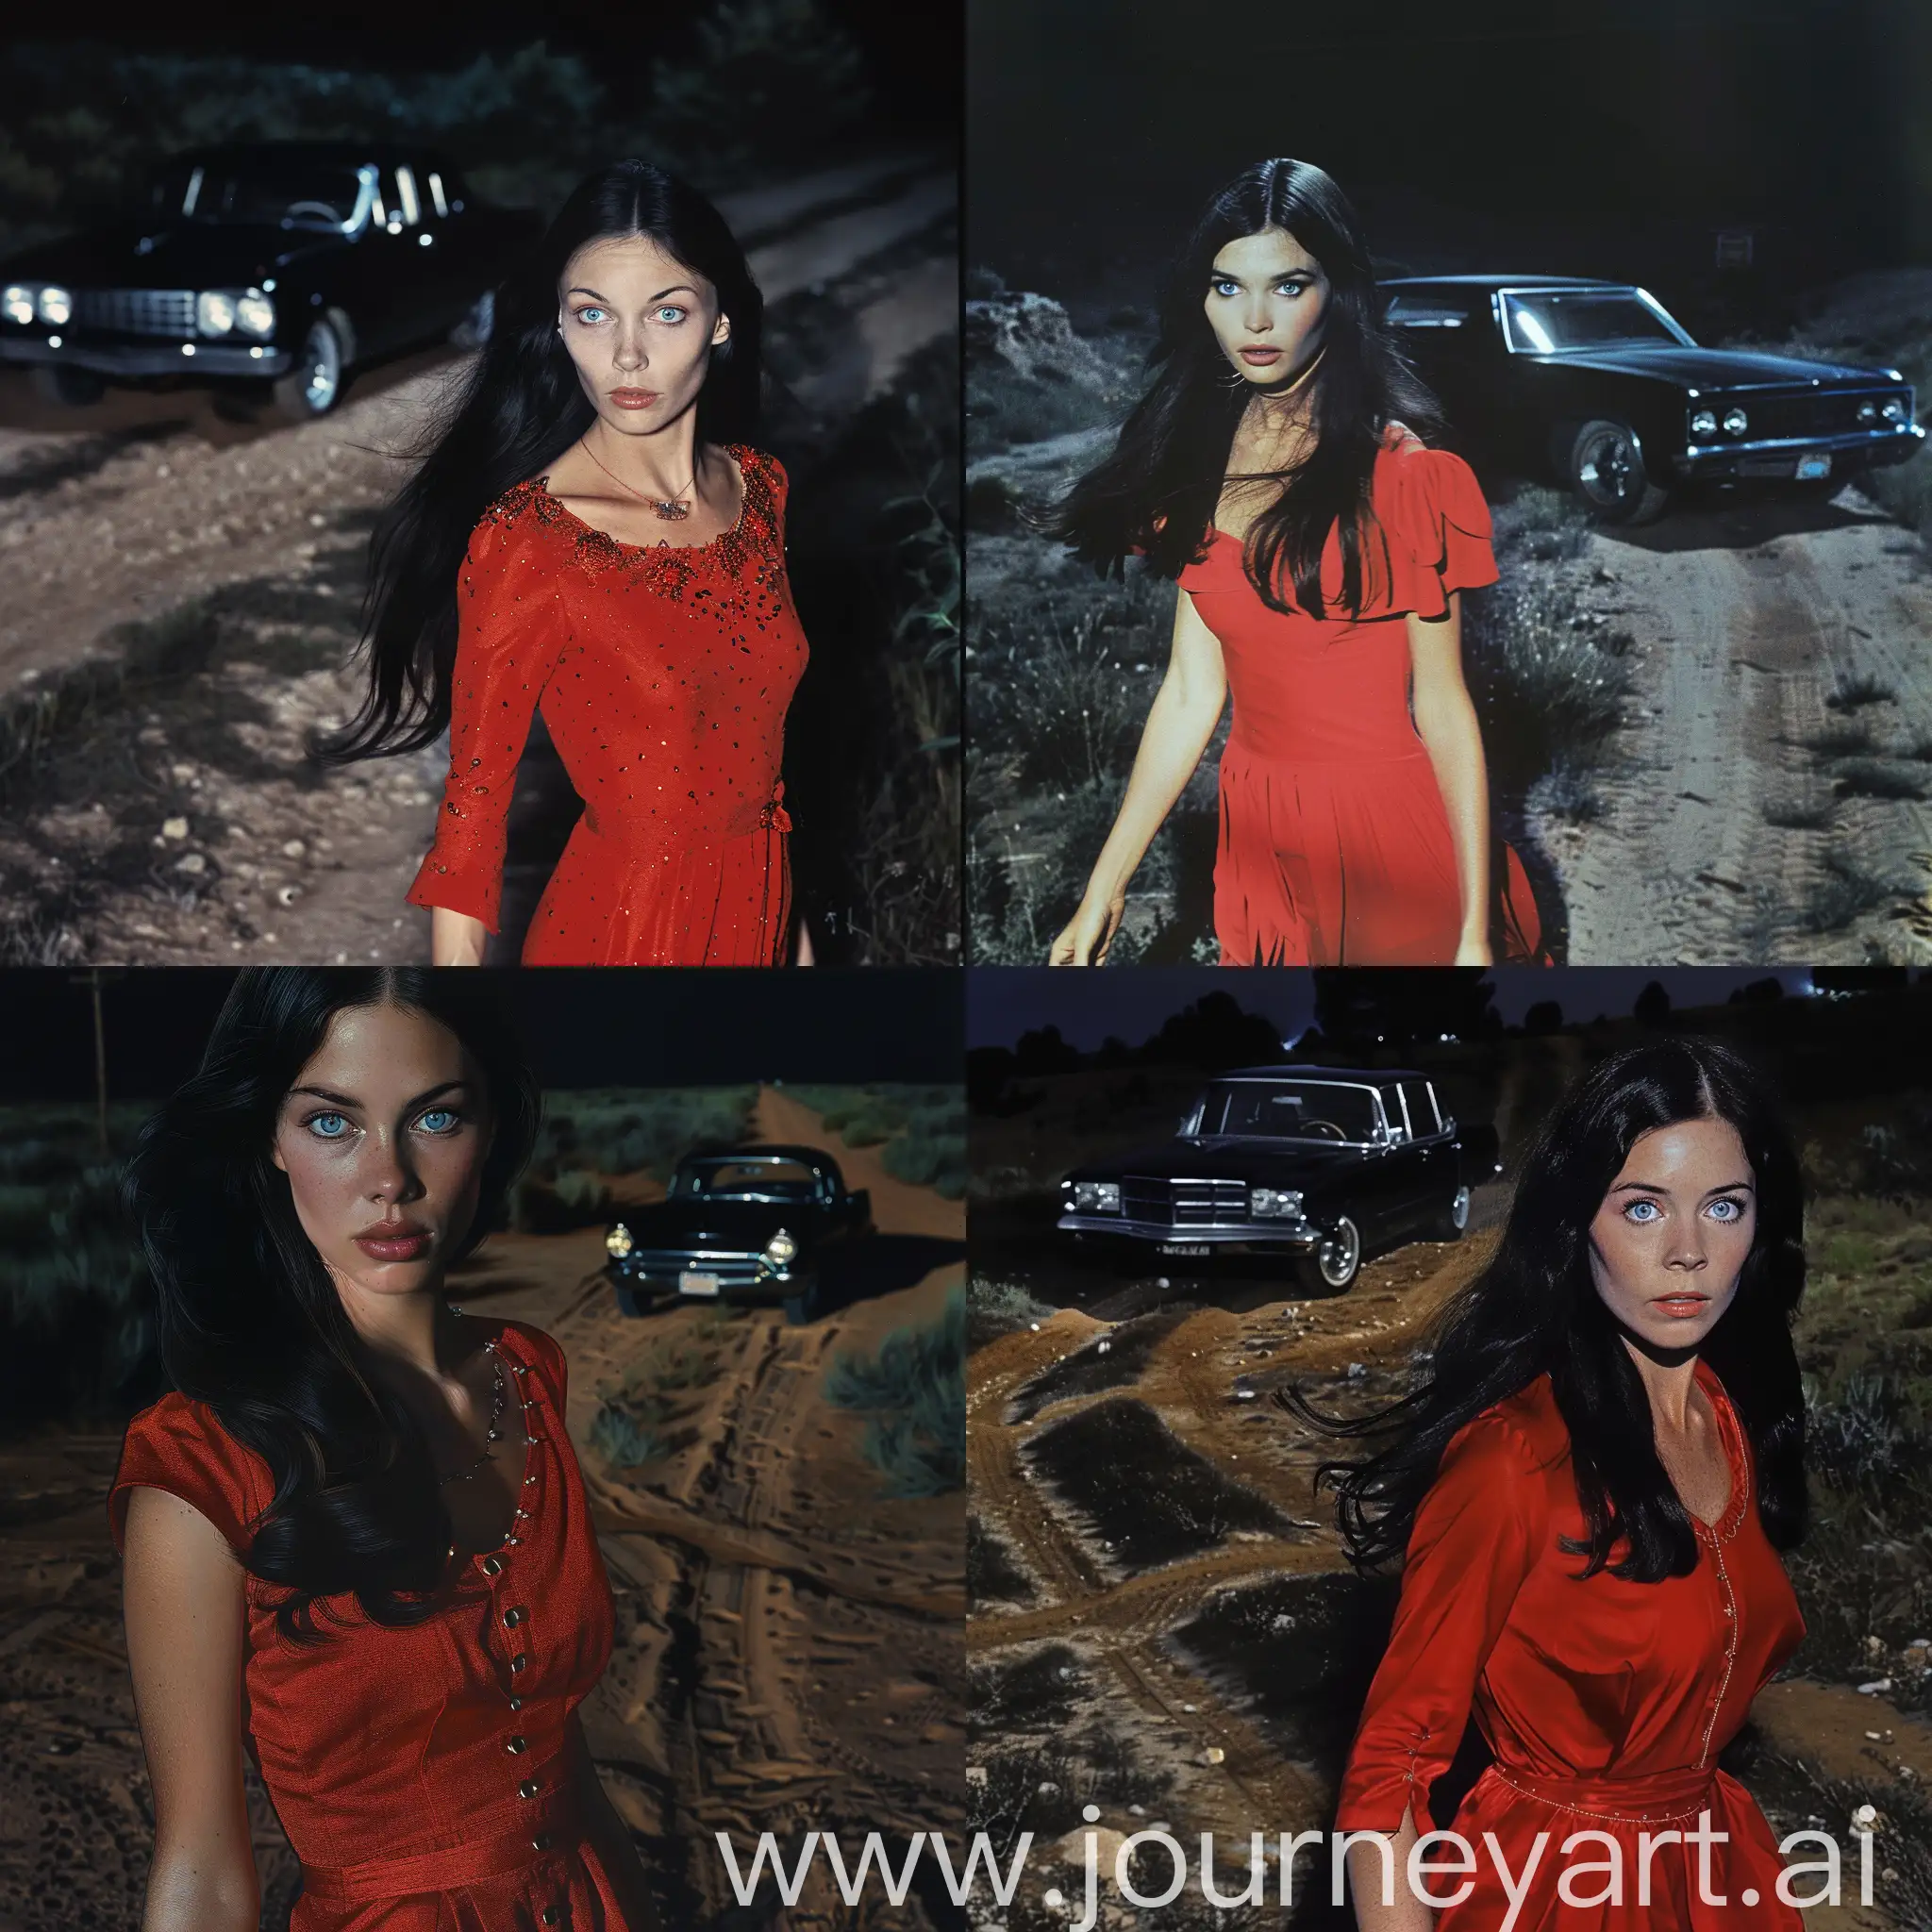 1960s-Woman-in-Red-Dress-Walking-at-Night-Crossroads-with-Black-Car